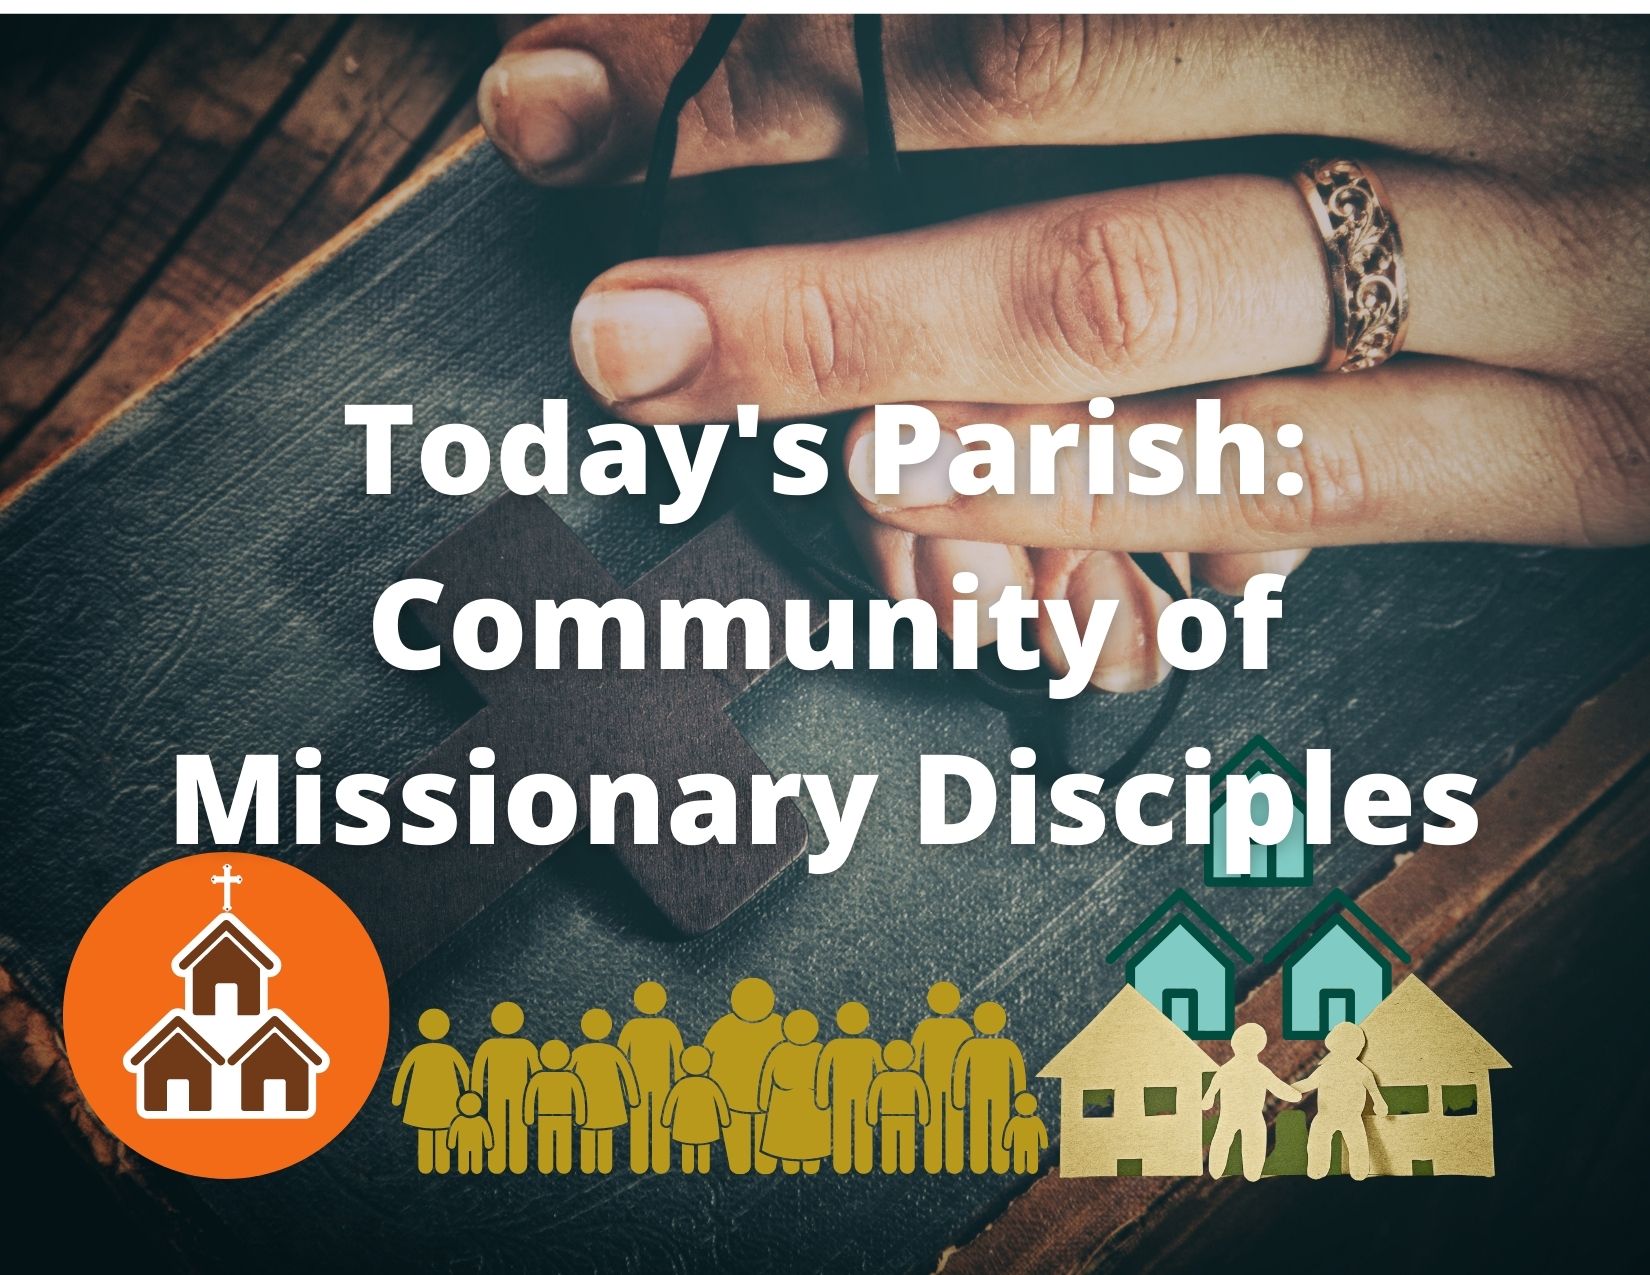 Today's Parish: Community of Missionary Disciples